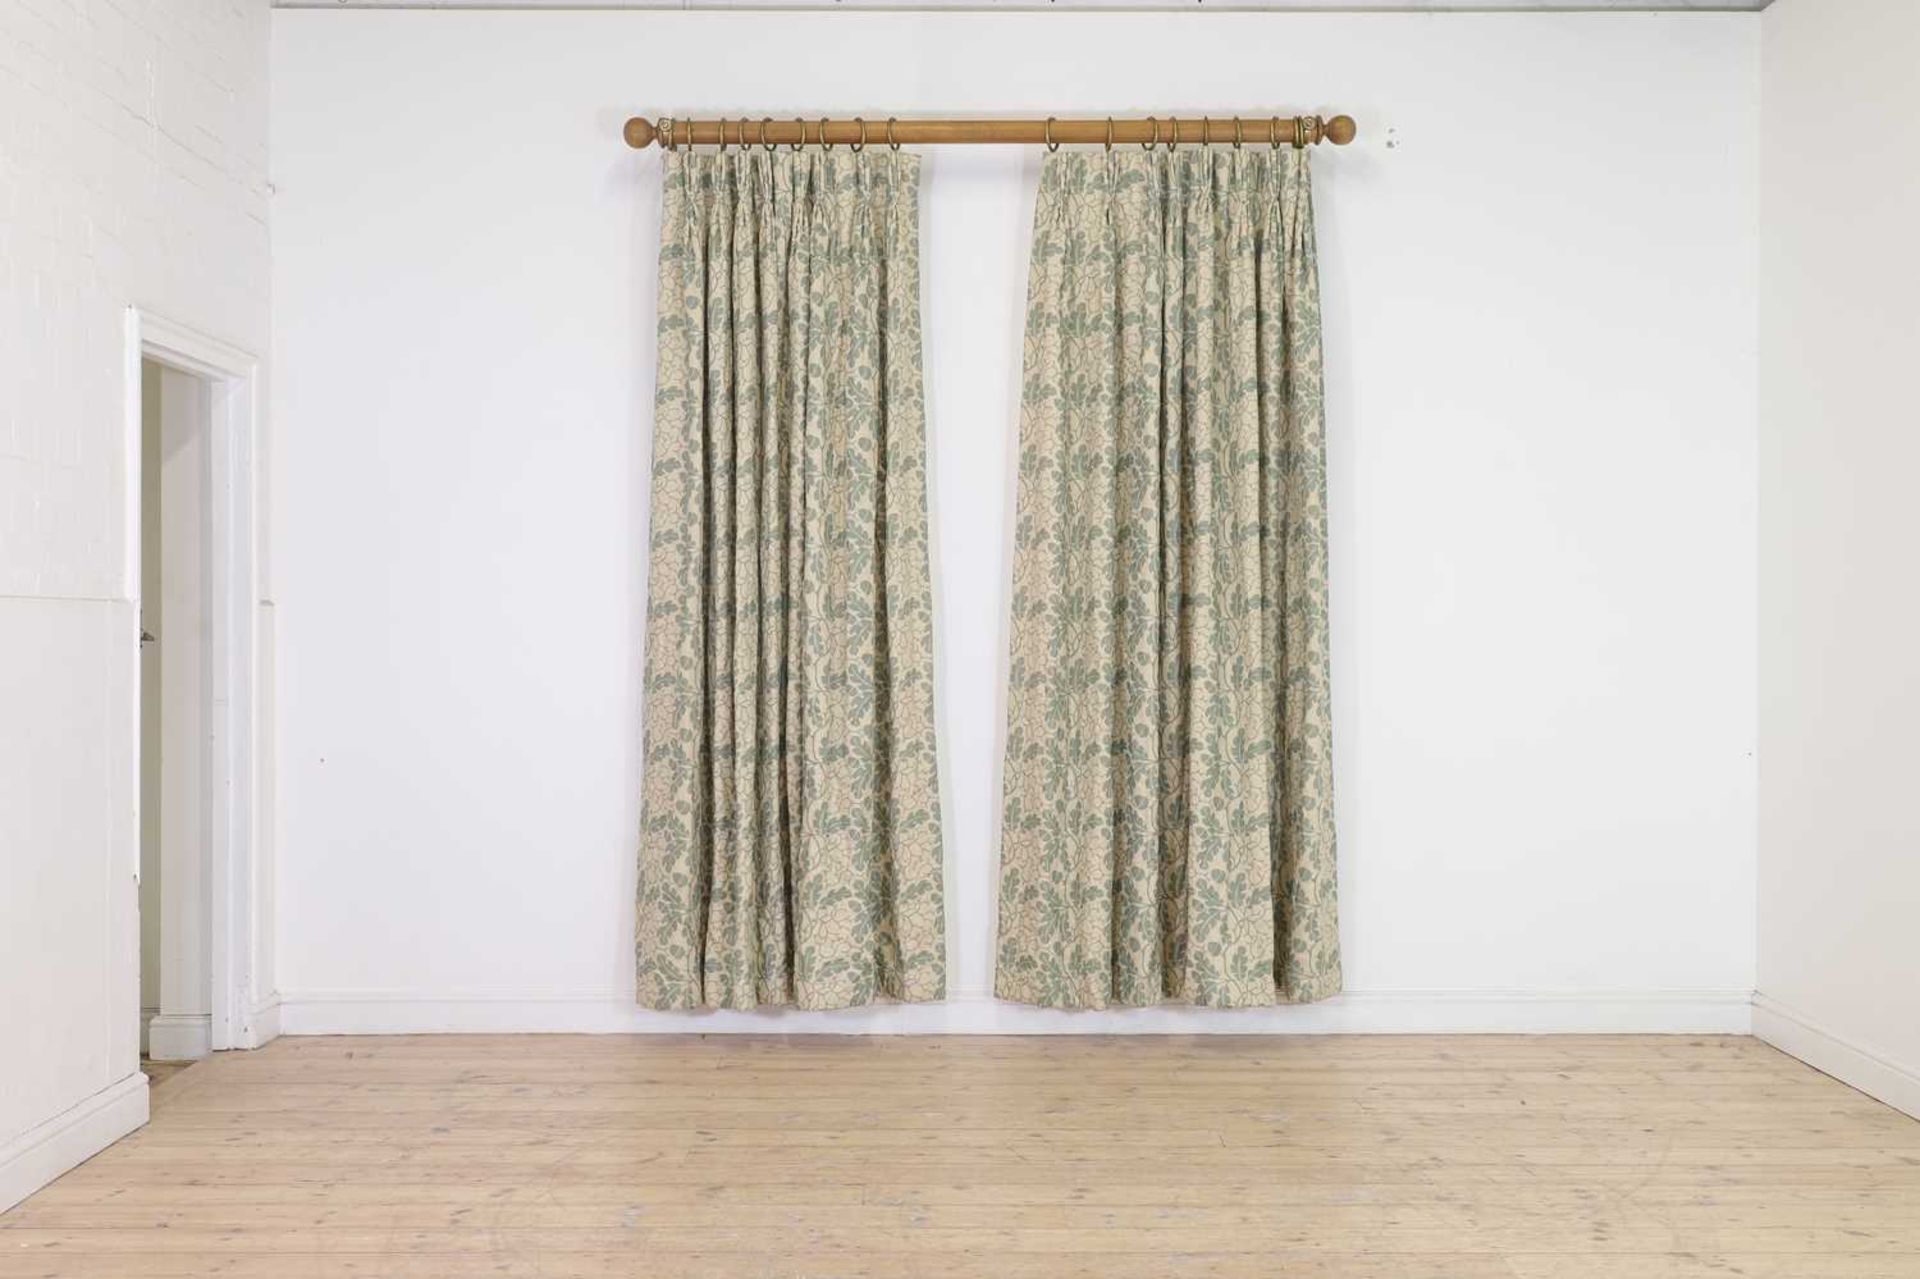 Two pairs of 'Oak Leaves' curtains by Robert Kime, - Image 4 of 14